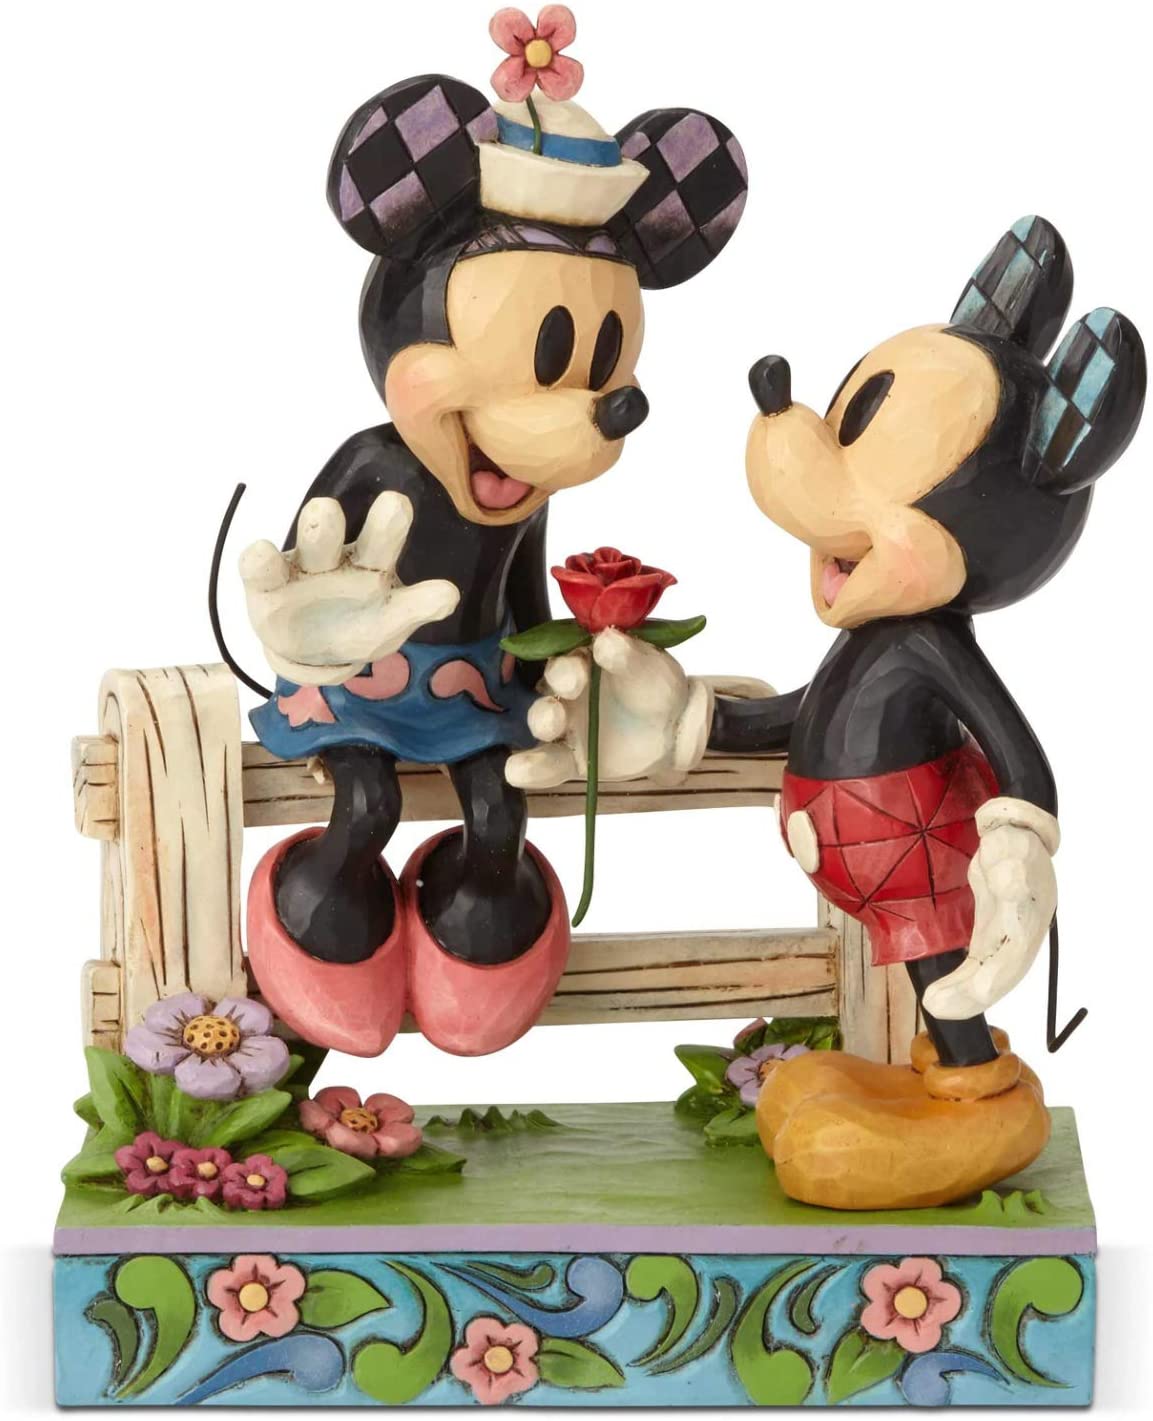 § Enesco - Disney Blossoming Romance (Mickey Mouse & Minnie Mouse Figurine)